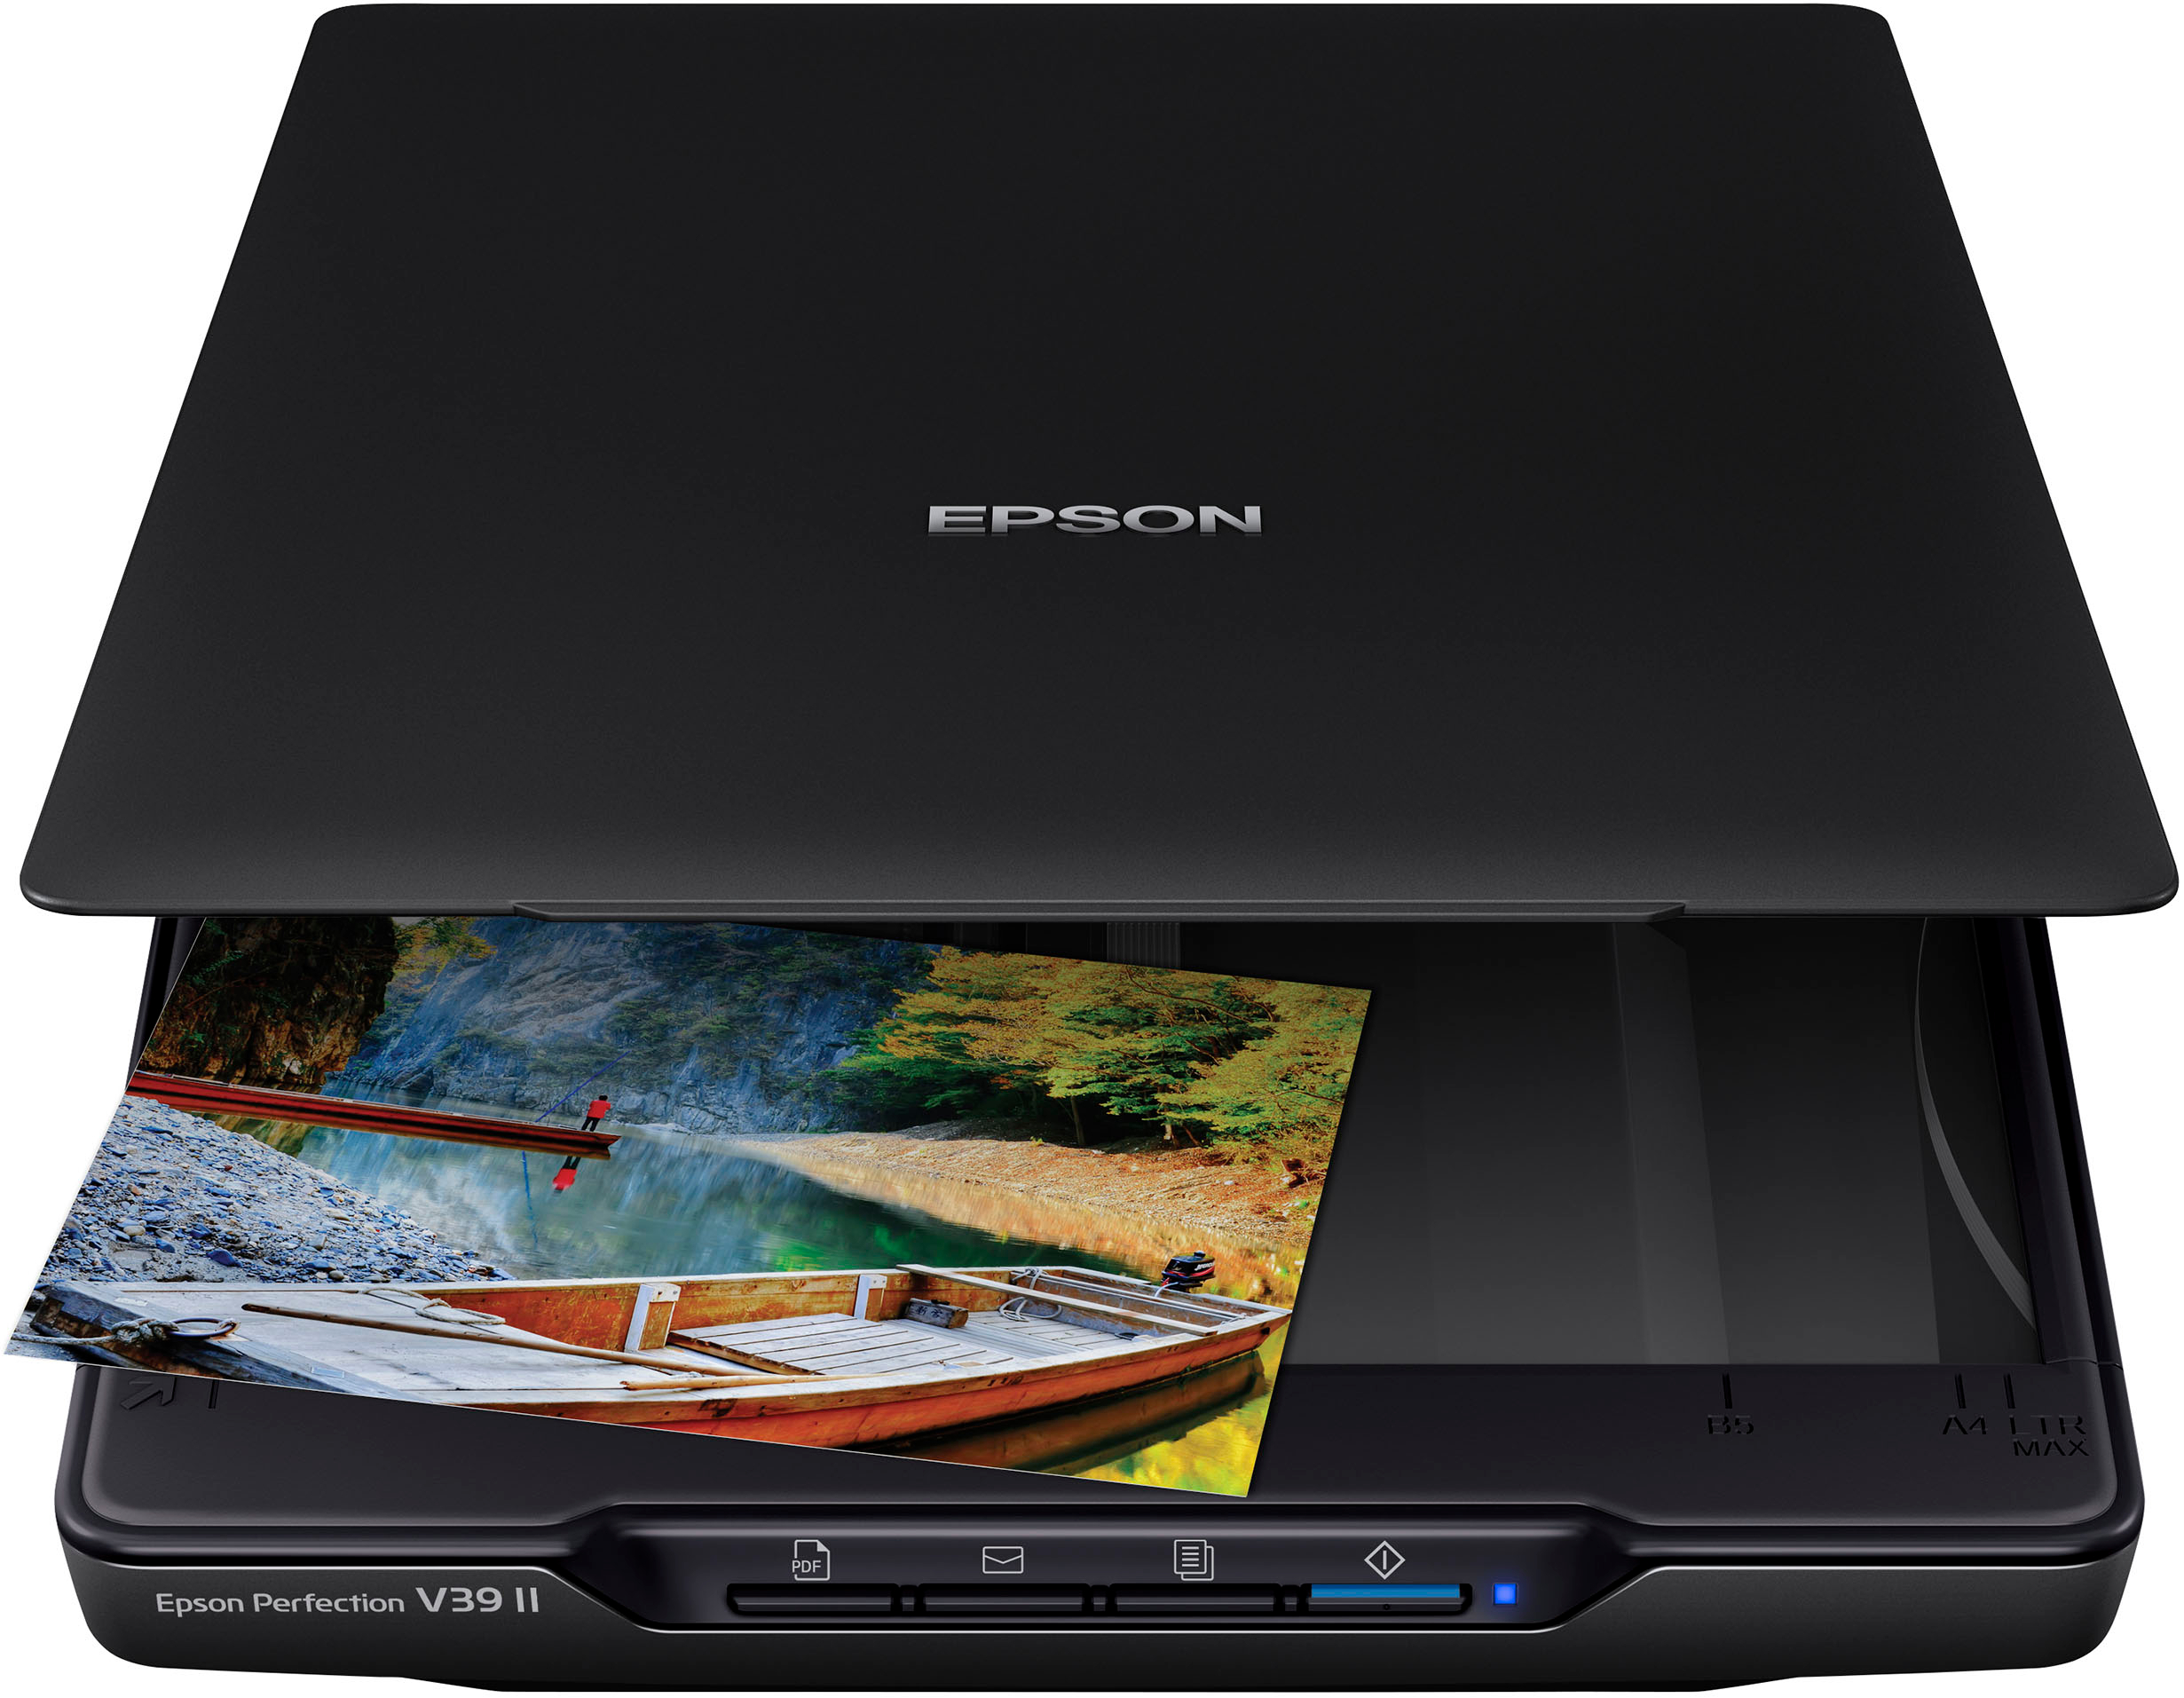 Epson launches Epson Perfection V39II scanner at Rs 6,999 - Times of India